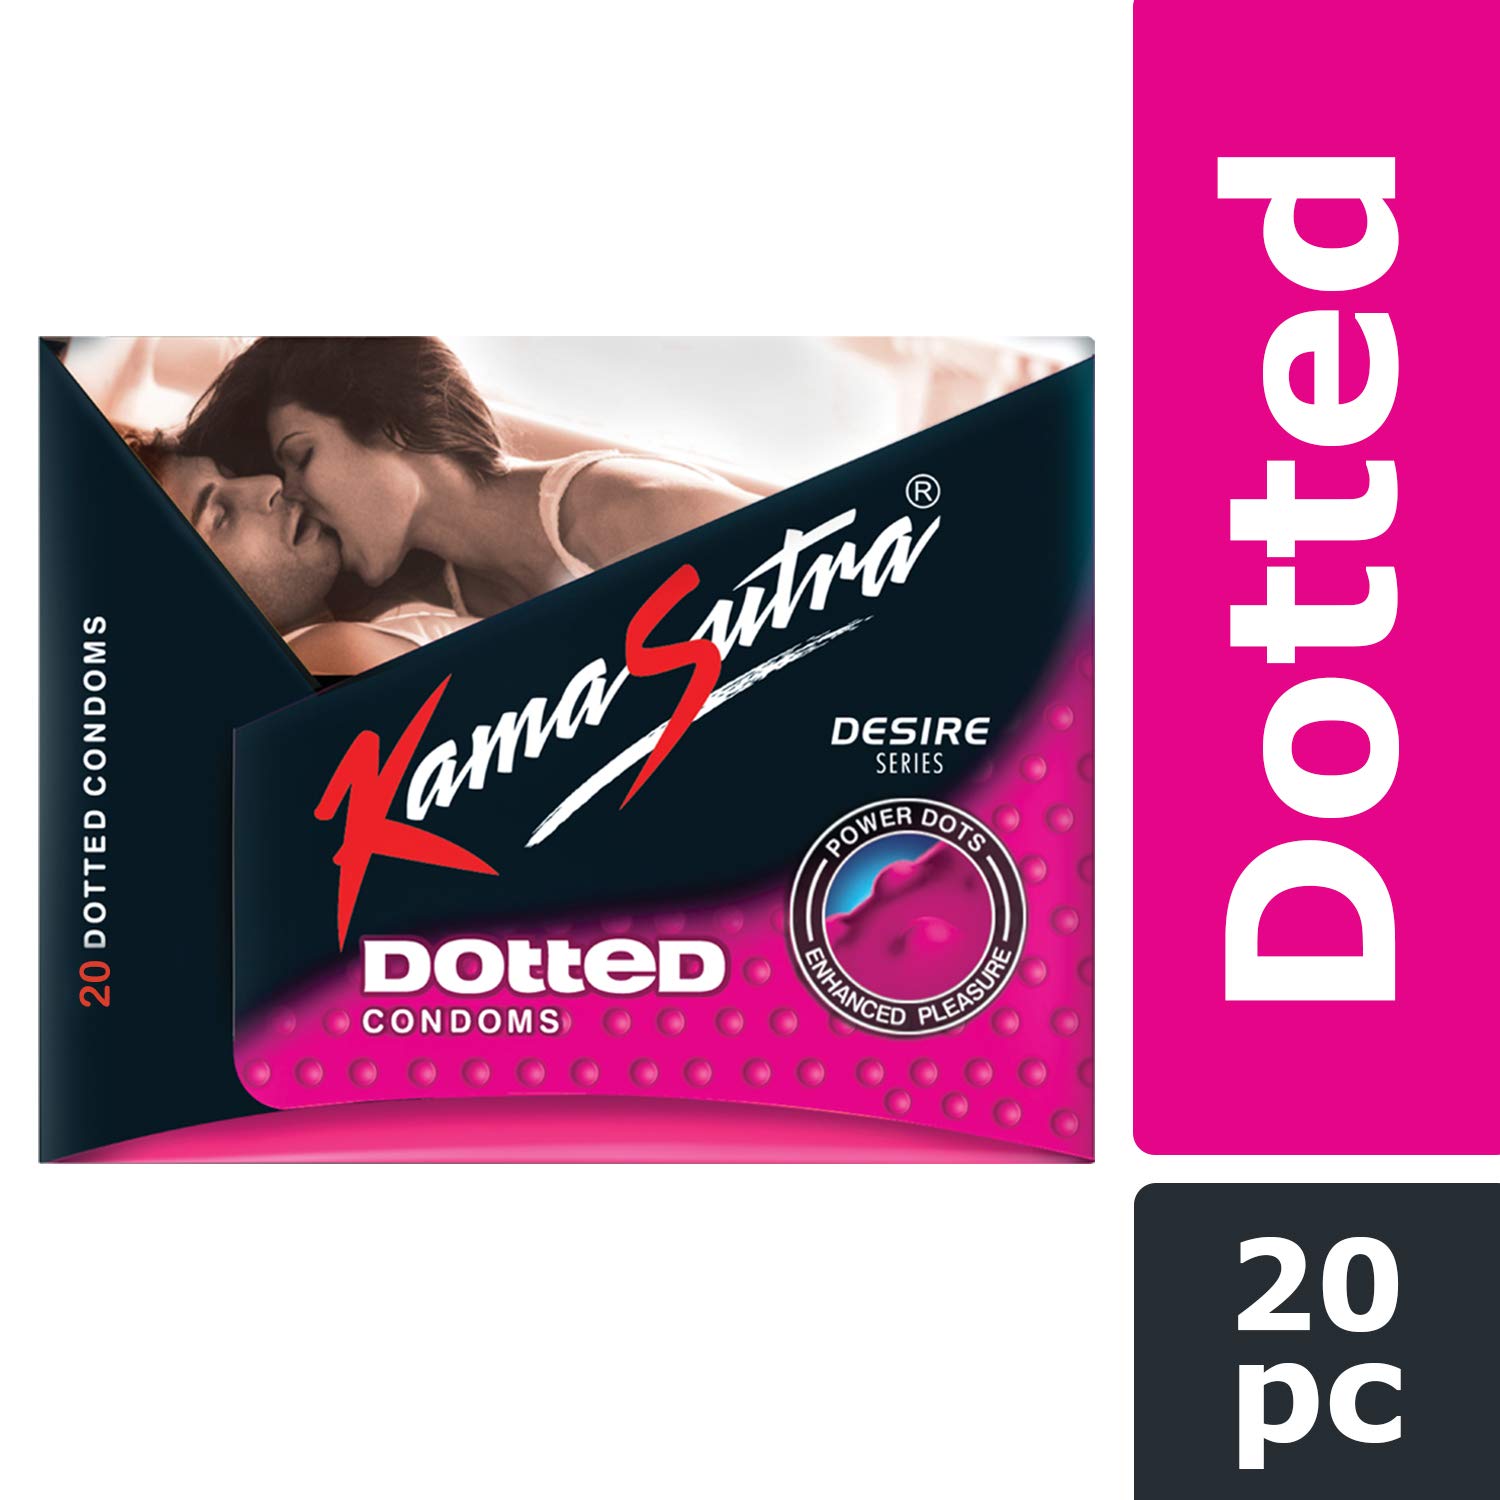 KamaSutra Dotted Condoms for Men - 20 Count